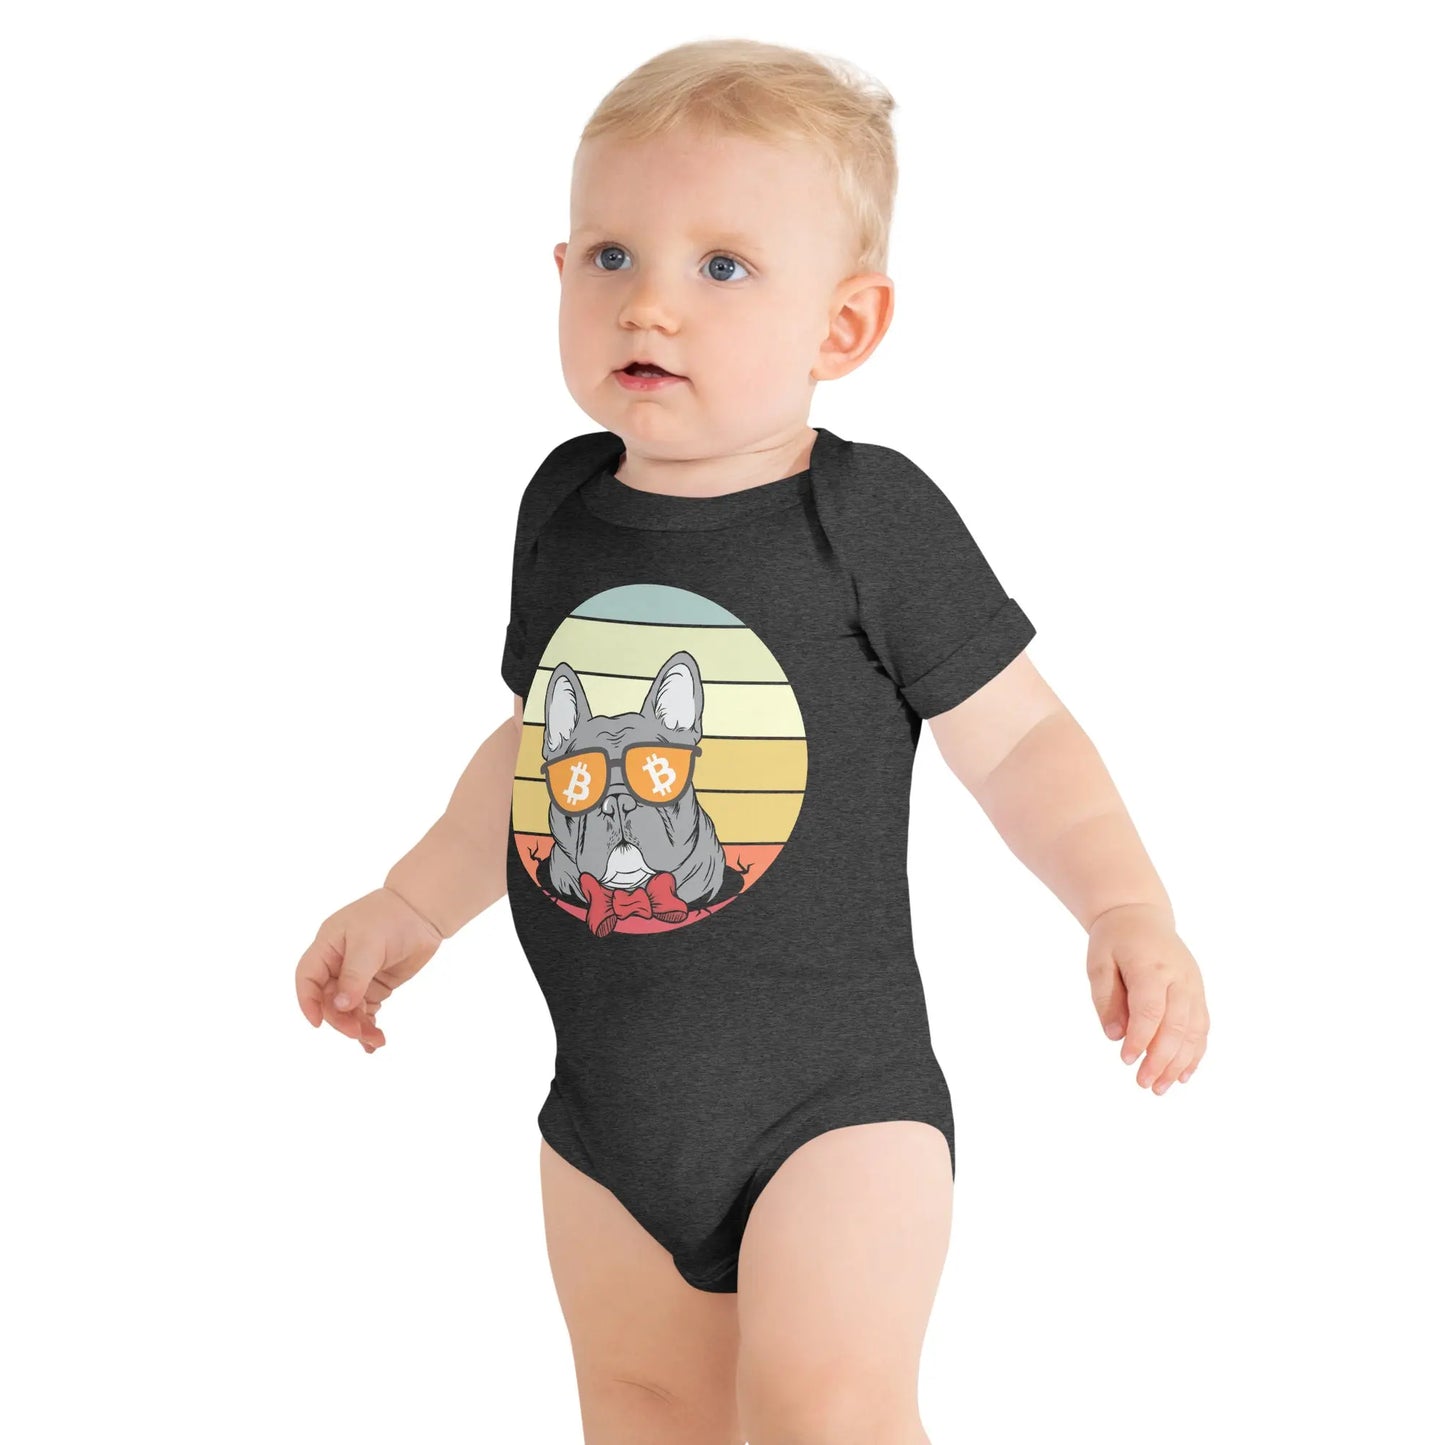 Vintage Dog Lovers - Bitcoin Baby Body Suit - One Piece with Short Sleeve Grey Heather